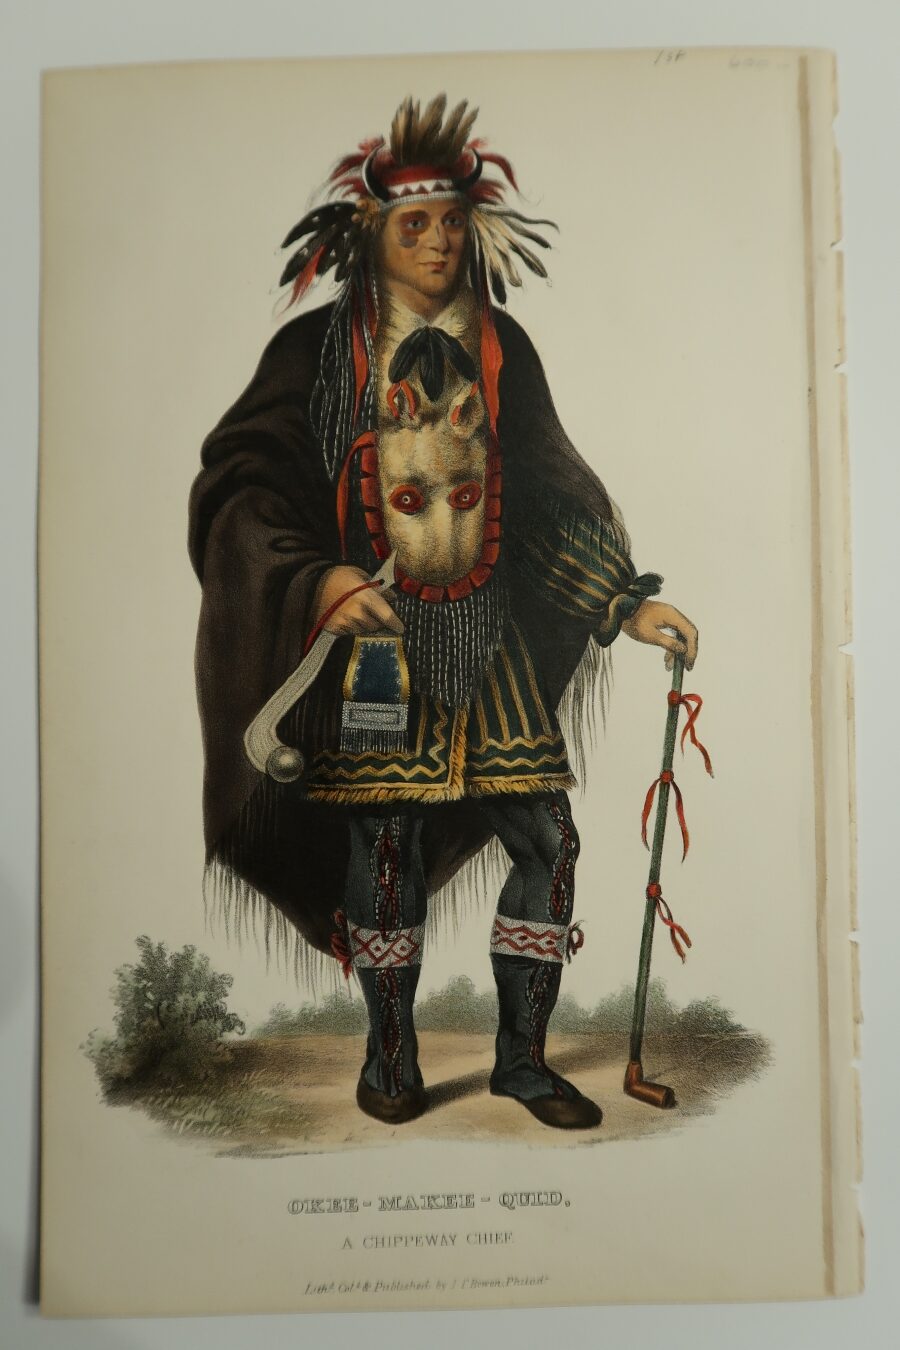 OKEE-MAKEE-QUID, is a Chippeway Chief. original watercolor lithograph, no.106 Rice, Rutter & Co. Full length, stunning chief with gun.